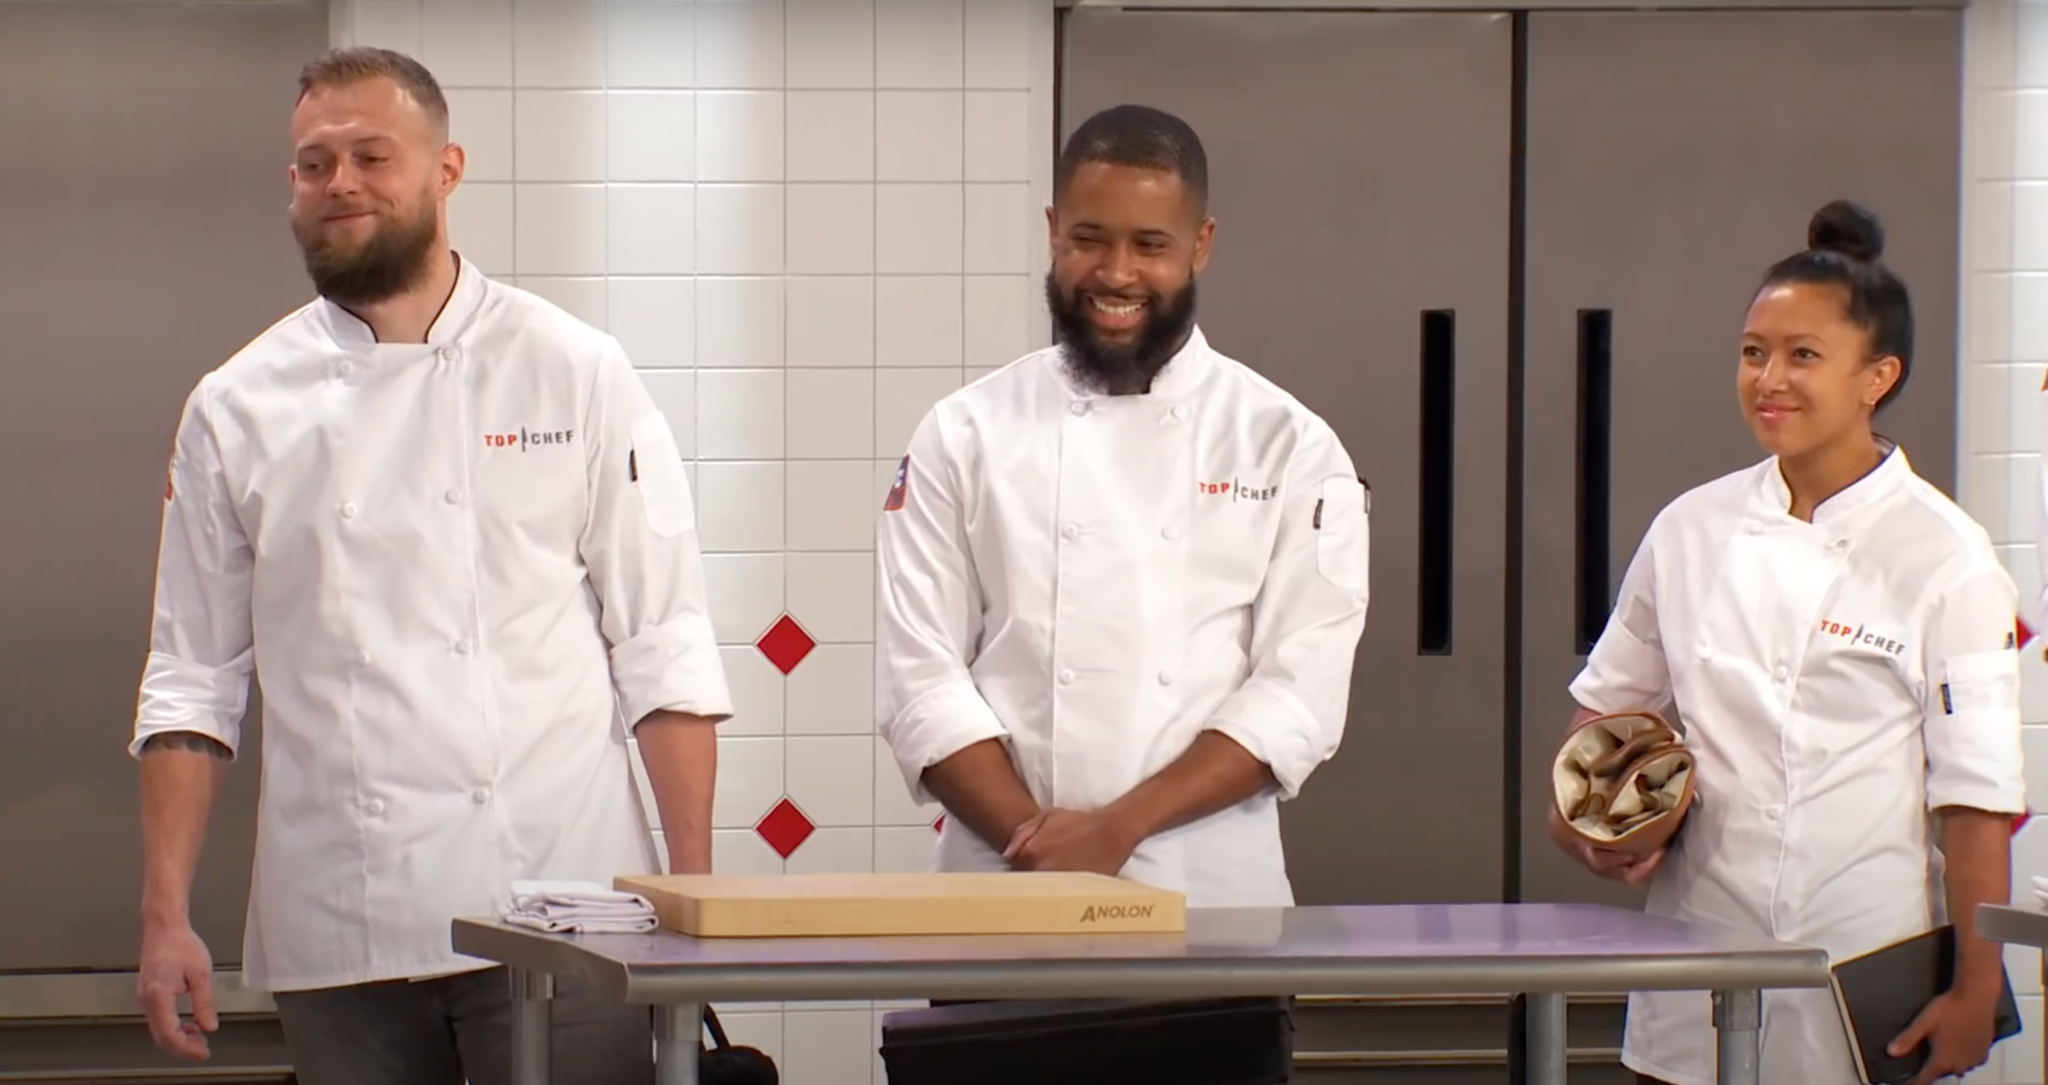 The new season of ‘Top Chef’ will travel to Houston